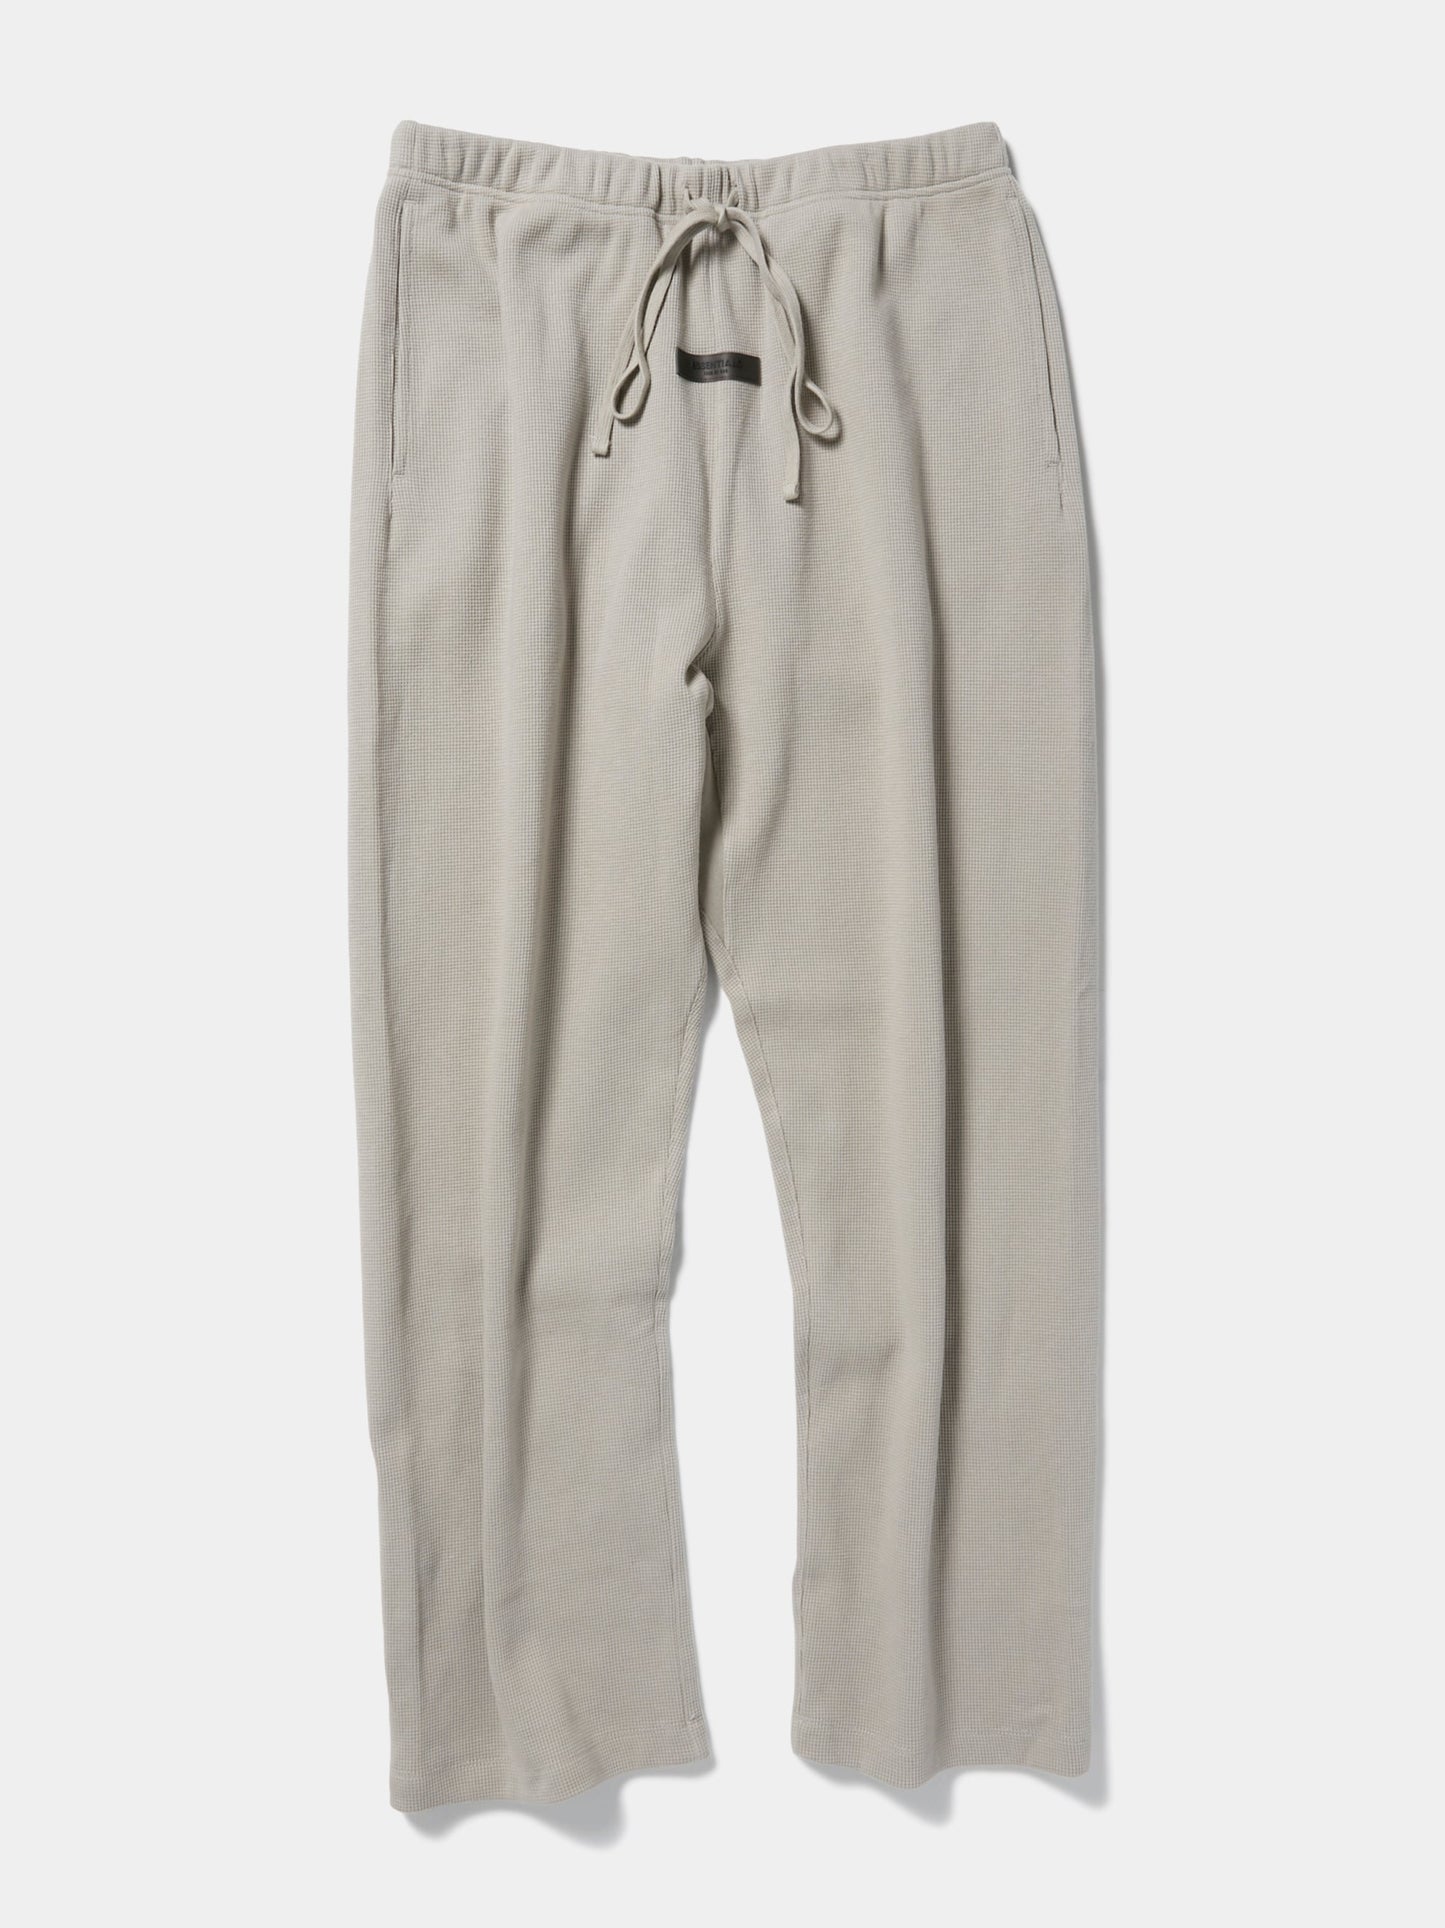 Relaxed Waffle Sweatpants (Seal)